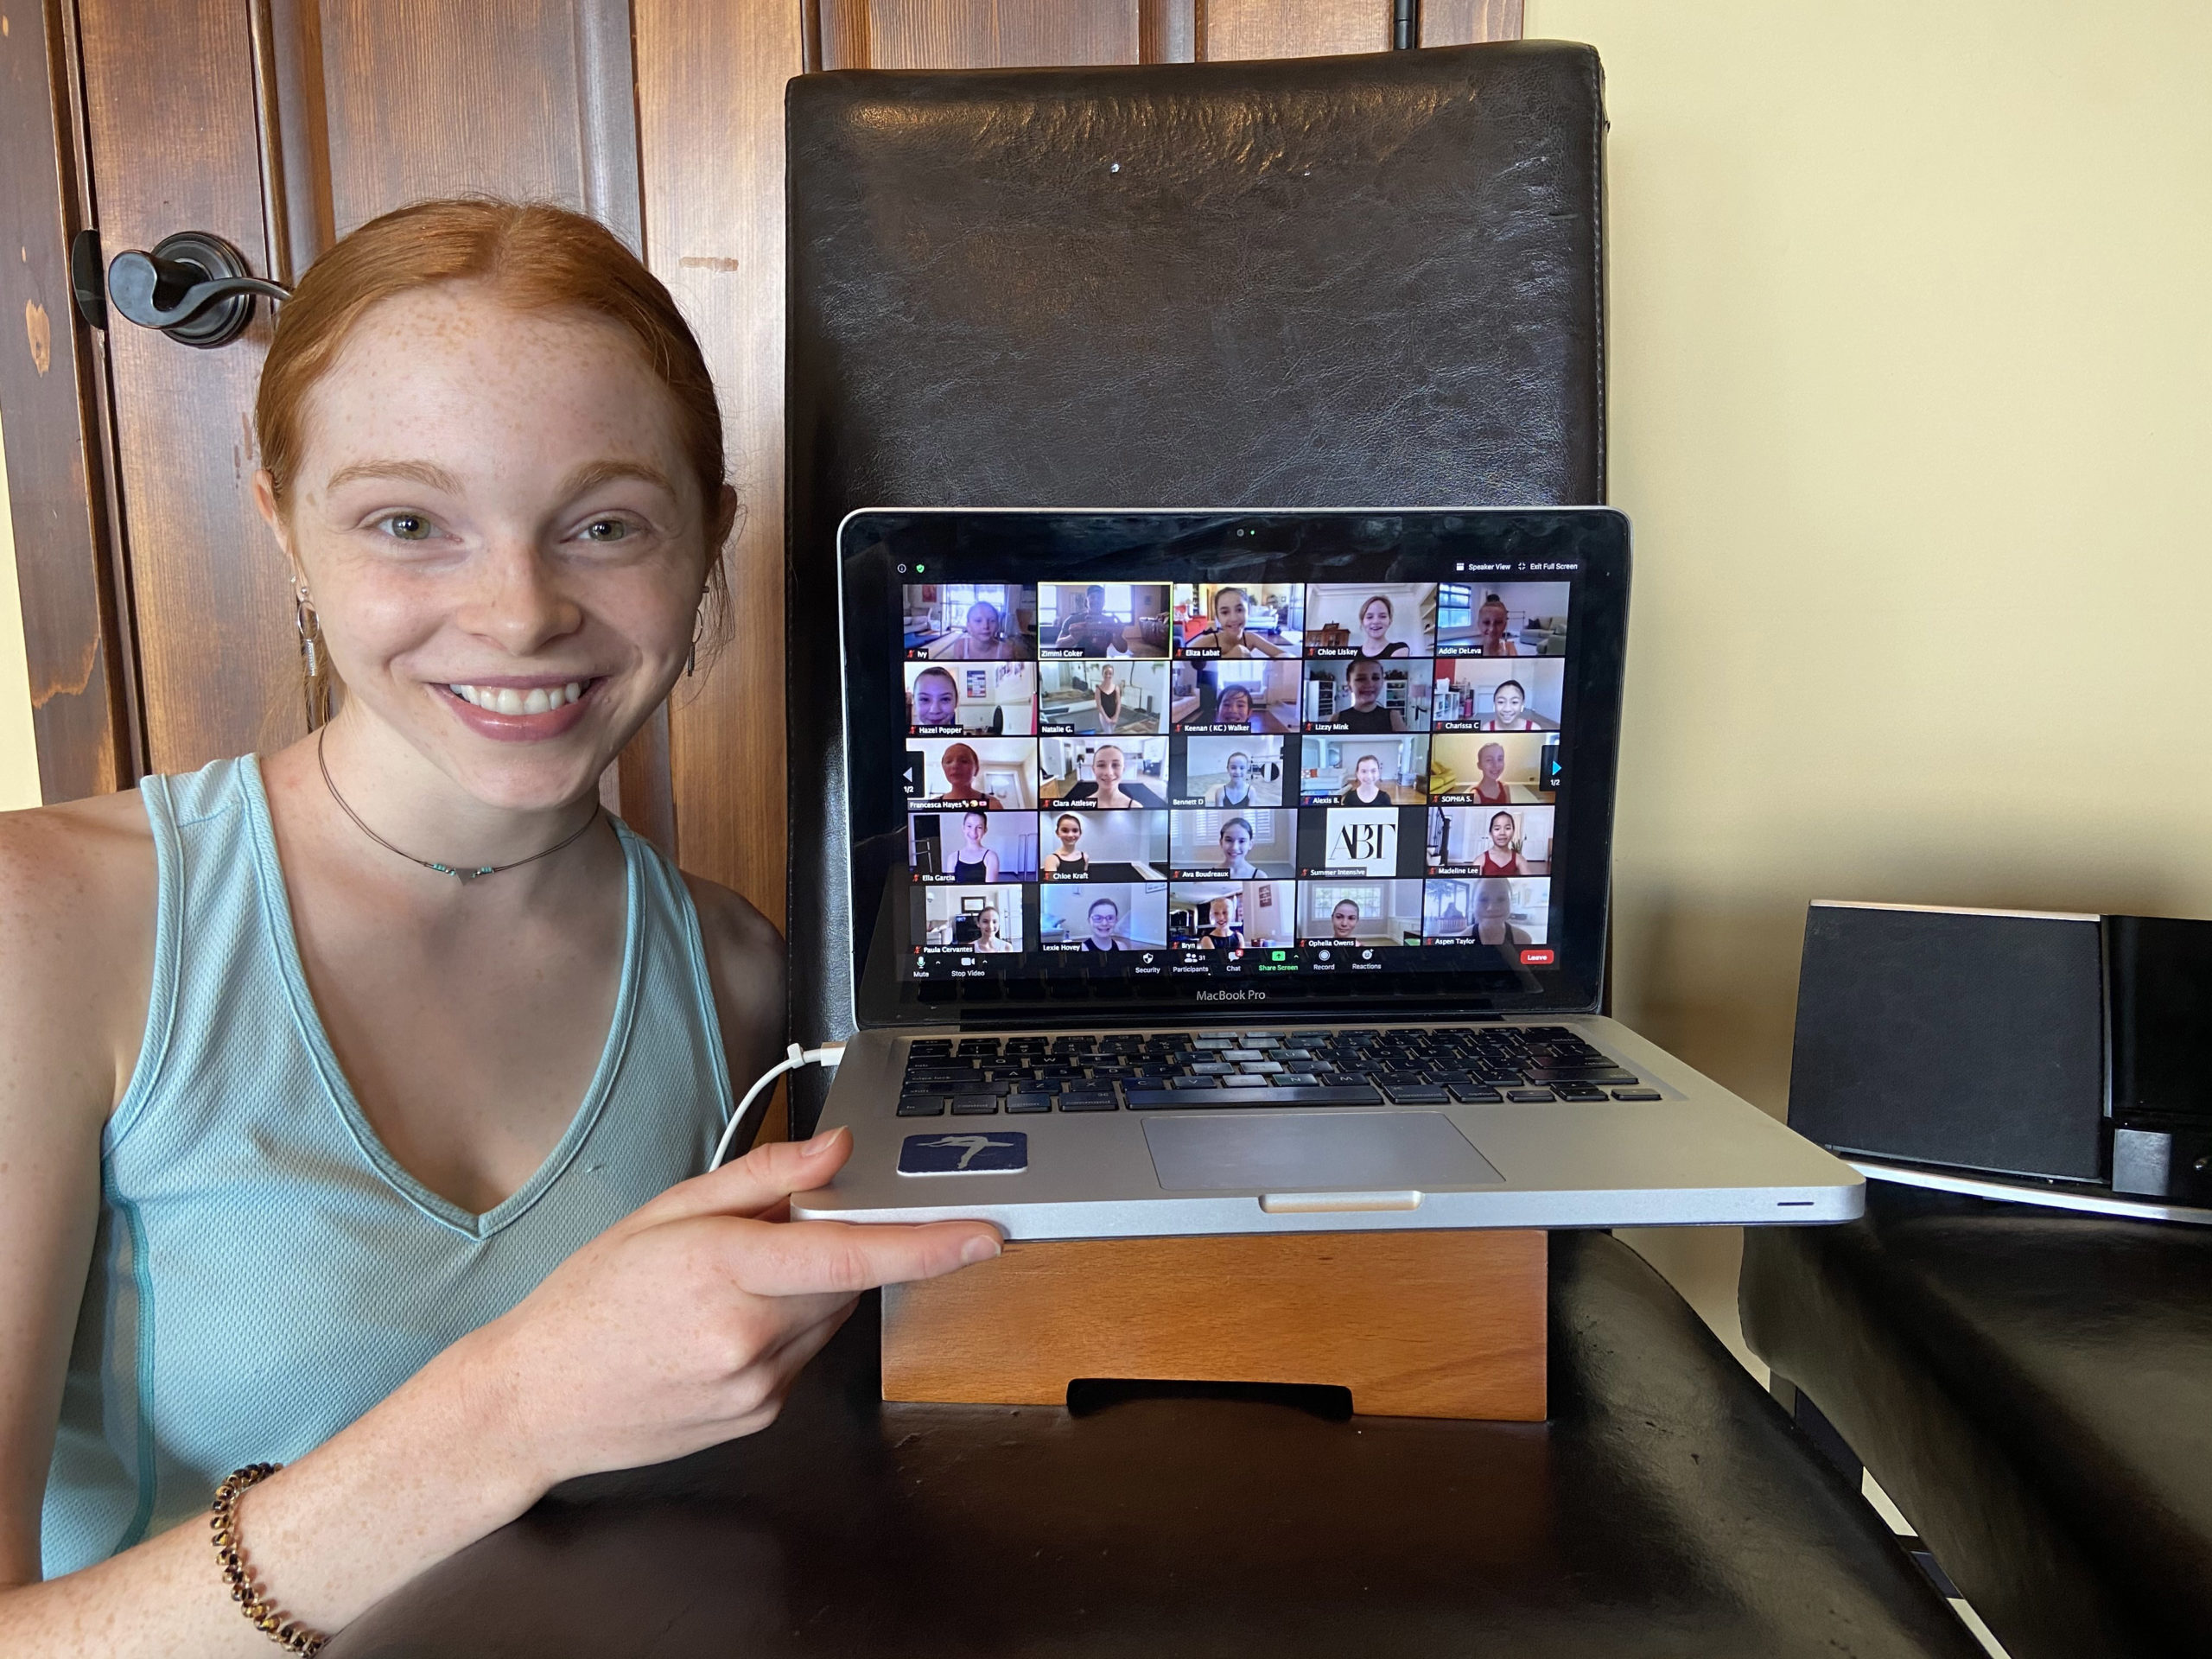 A redhead woman holds up a laptop with the screen showing a Zoom of many screens